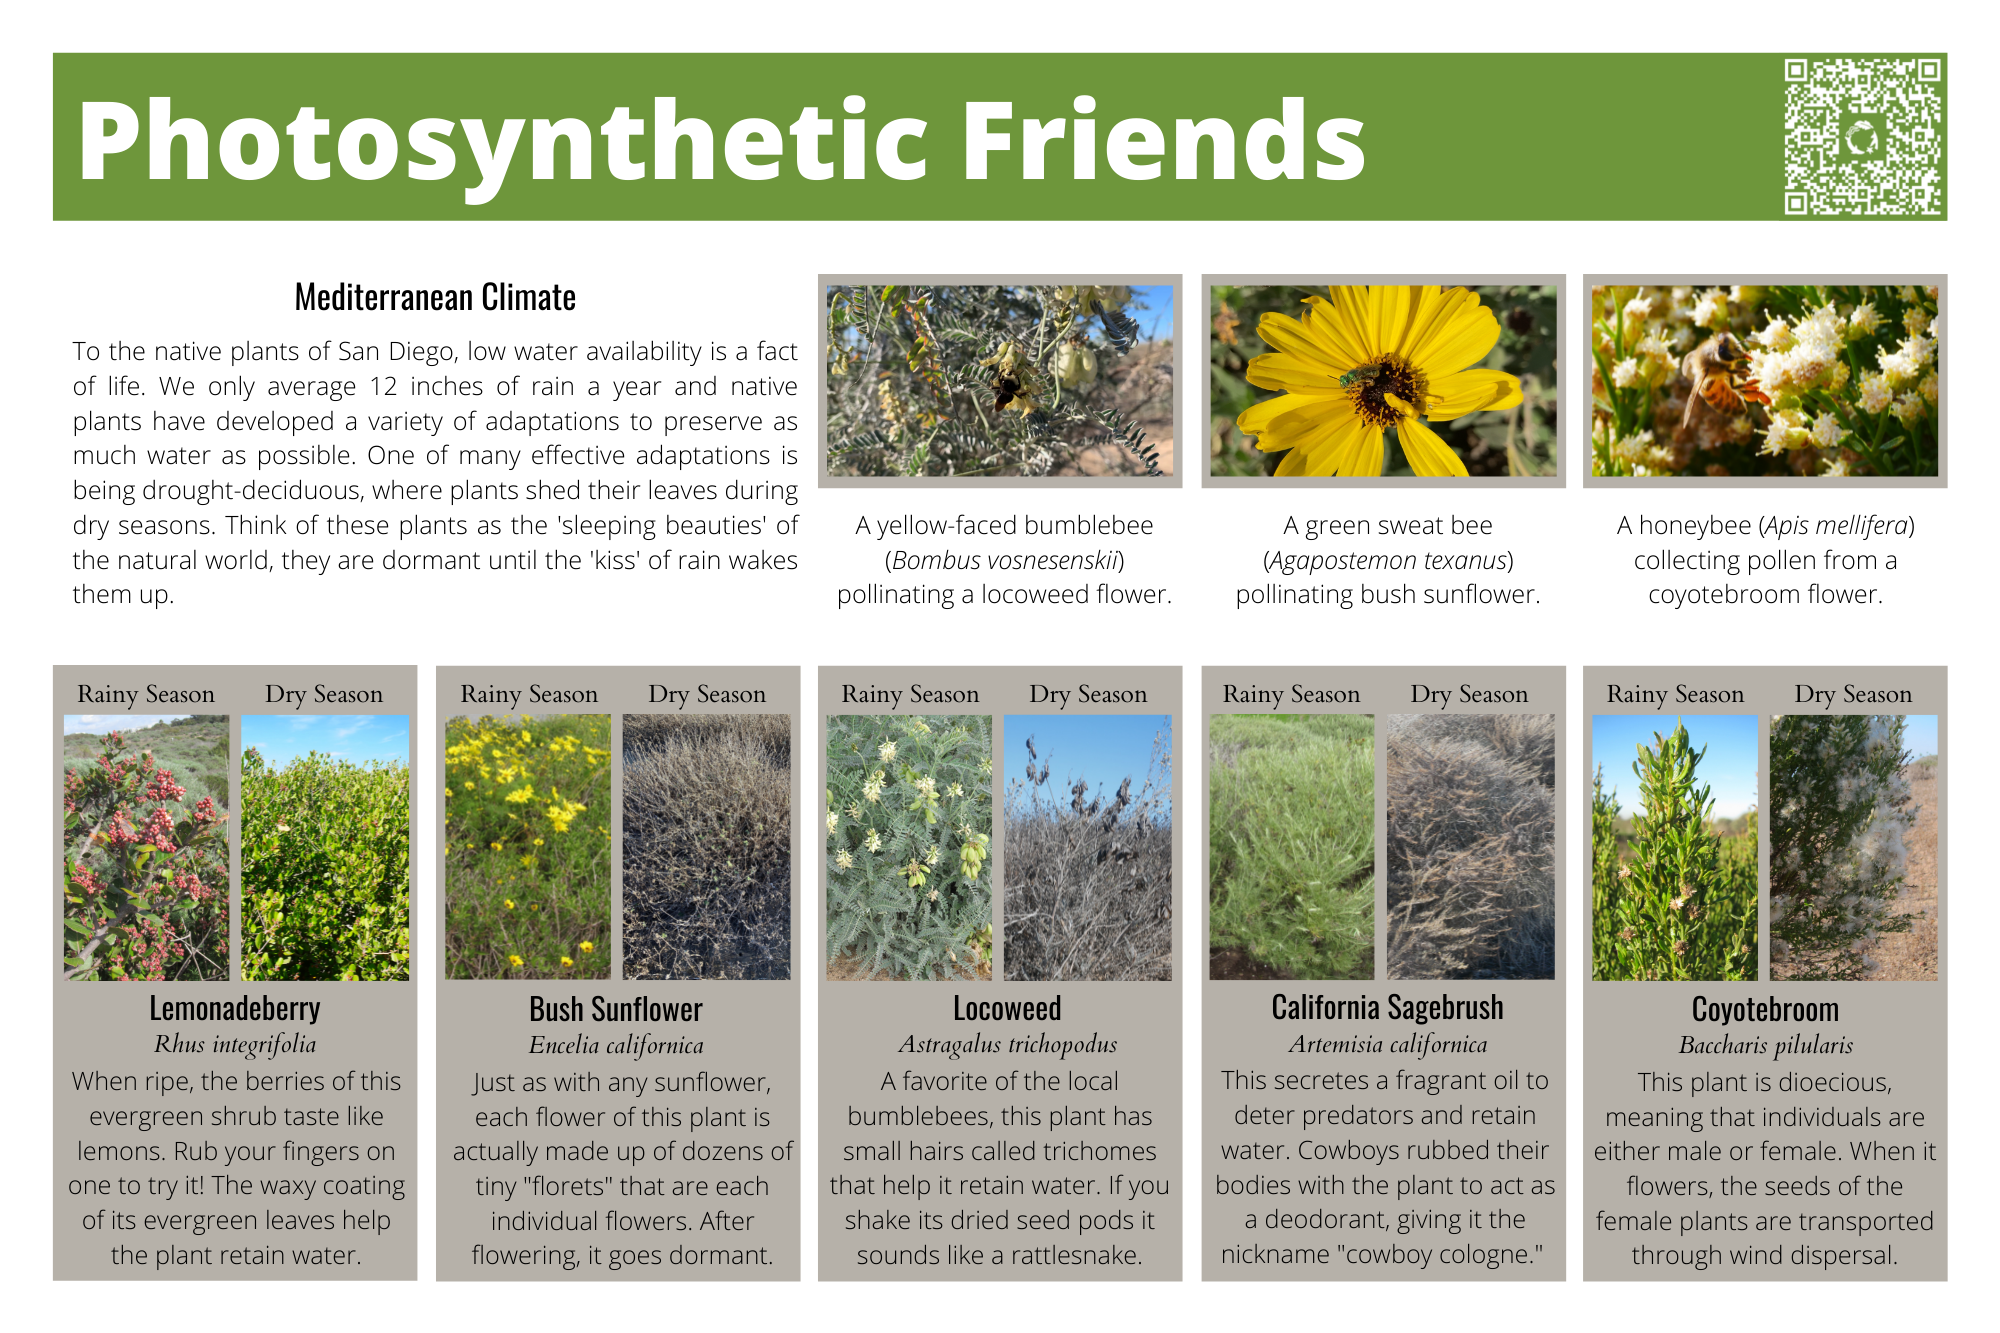 Photosynthetic Friends Trail Sign